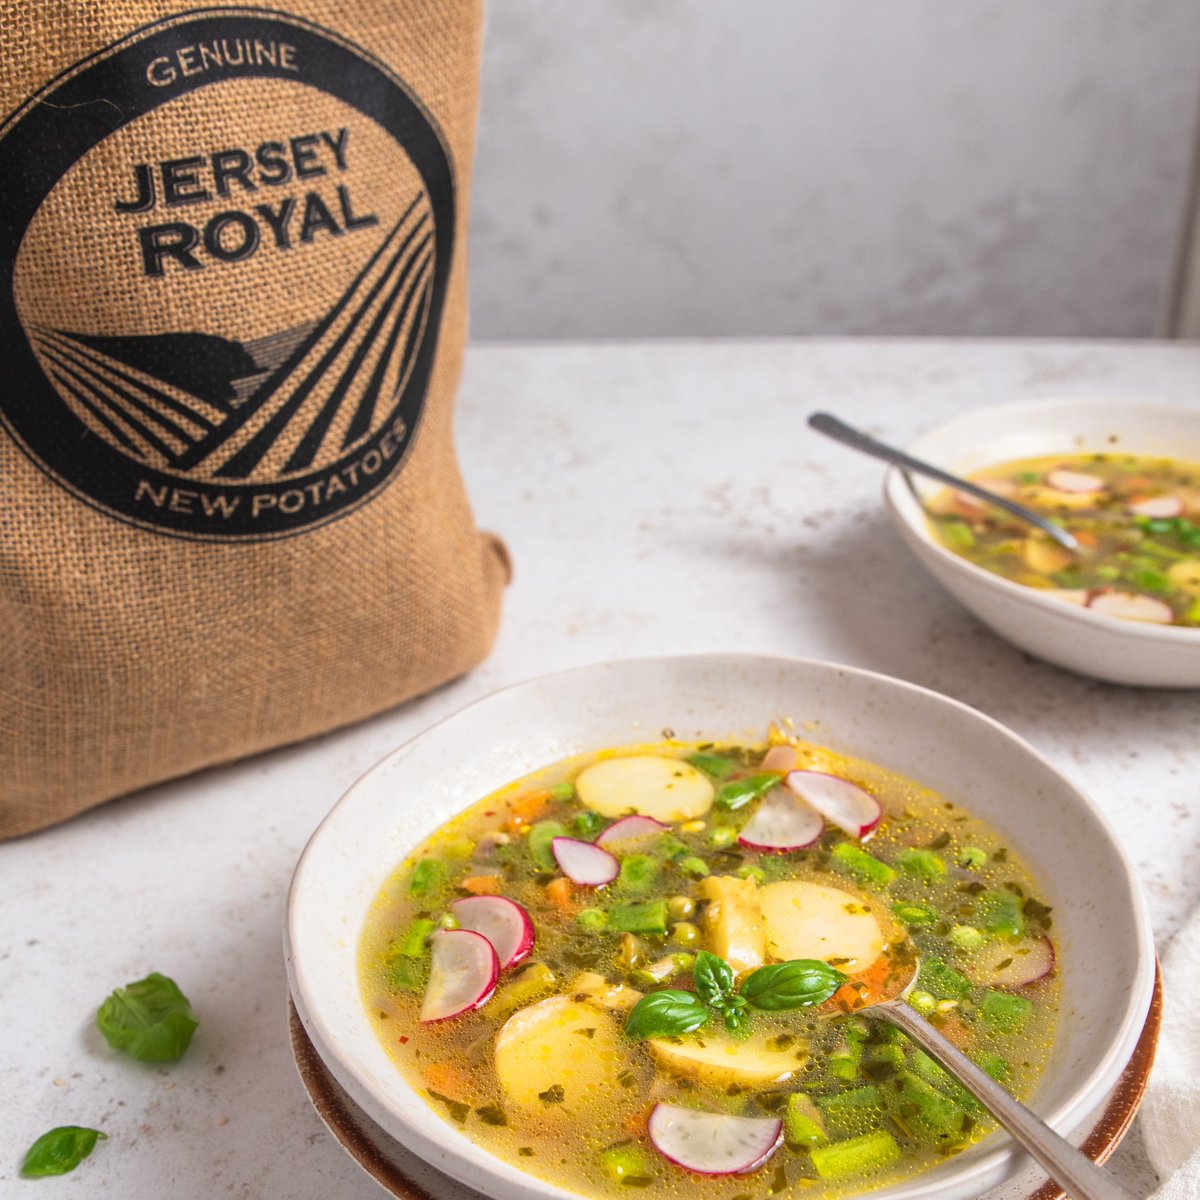 We’ve flipped this classic recipe on its head, creating a super fresh springtime #JerseyRoyal minestrone soup packed full of seasonal veggies! This versatile recipe can be adapted with whatever’s in the fridge to create something delicious bit.ly/44hoERu #SimplySeasonal